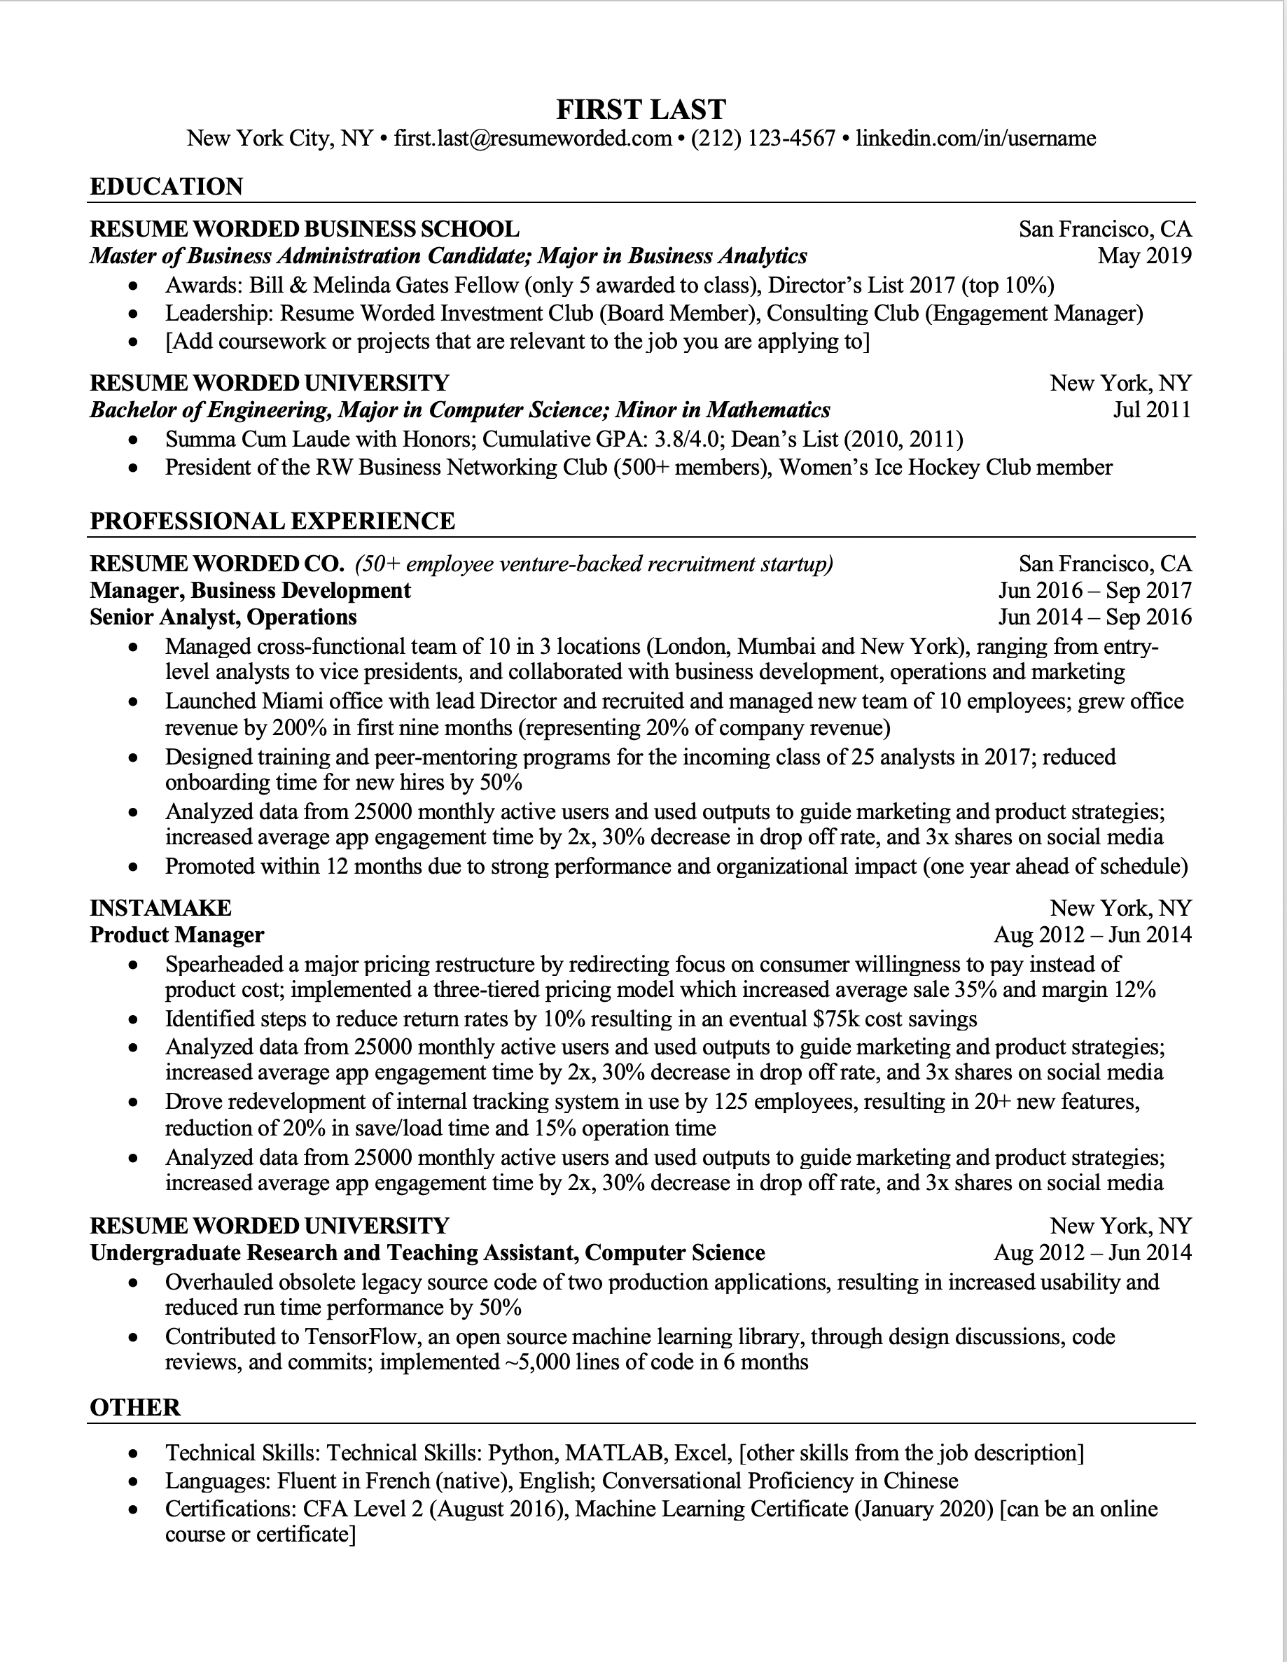 Professional Ats Resume Templates For Experienced Hires And within dimensions 1287 X 1662